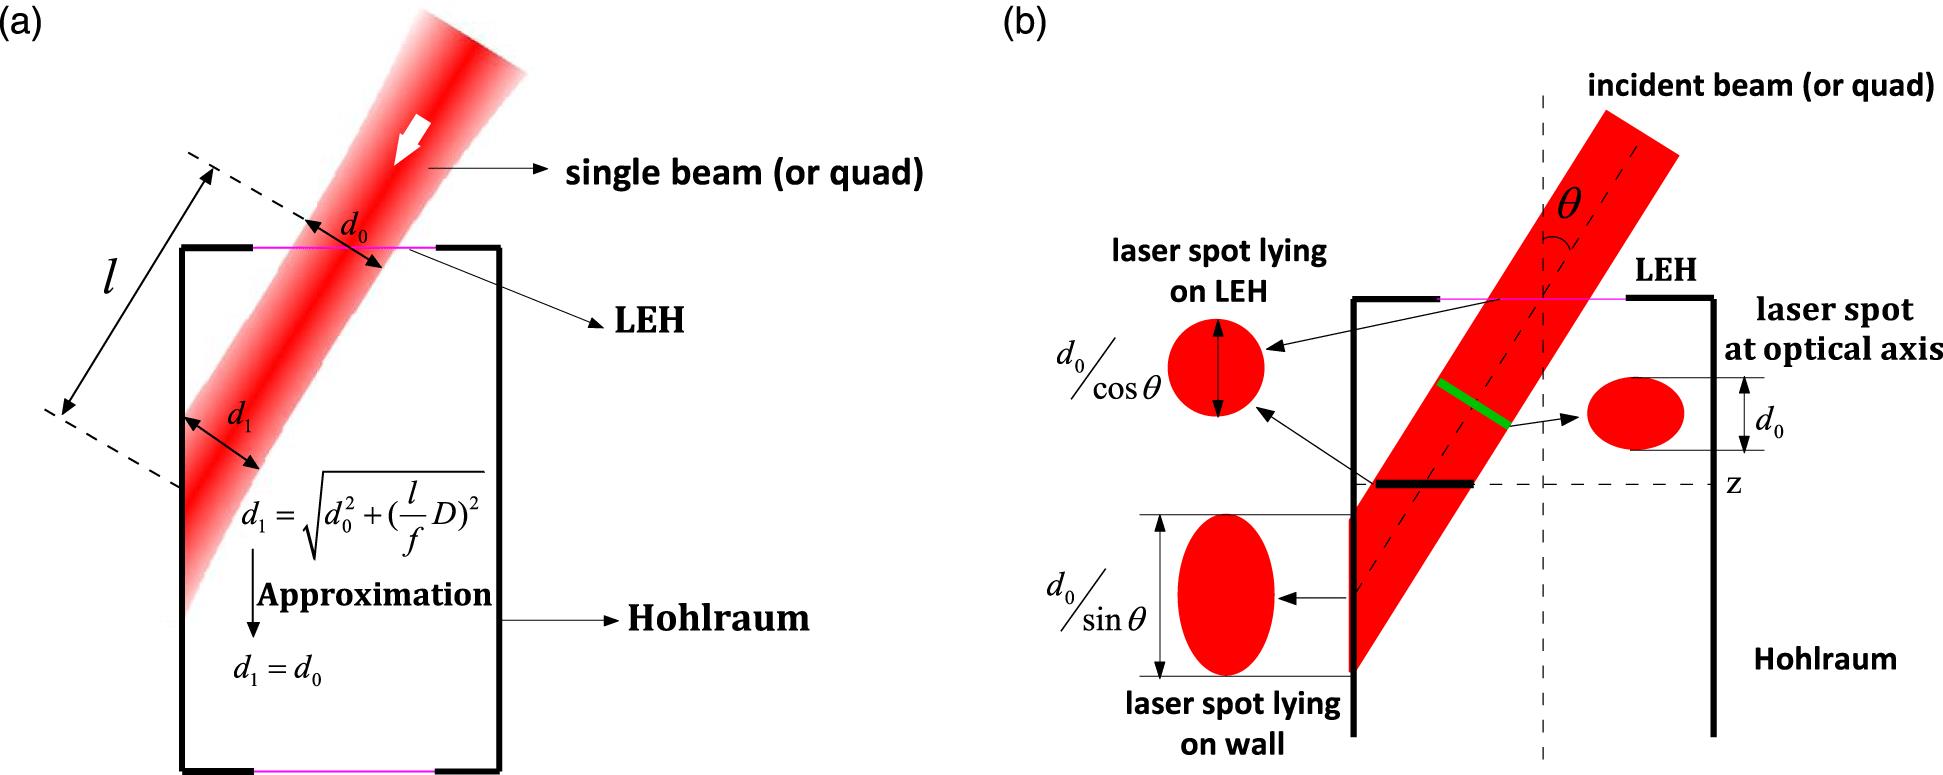 The approximation of beam propagation into hohlraum. (a) An actual beam (quad) passes through the LEH and reaches the hohlraum wall, the ideal focal spot position locates near the LEH and the incident beam is defocusing in hohlraum. (b) The relationship of beam projection in hohlraum with propagation approximation.